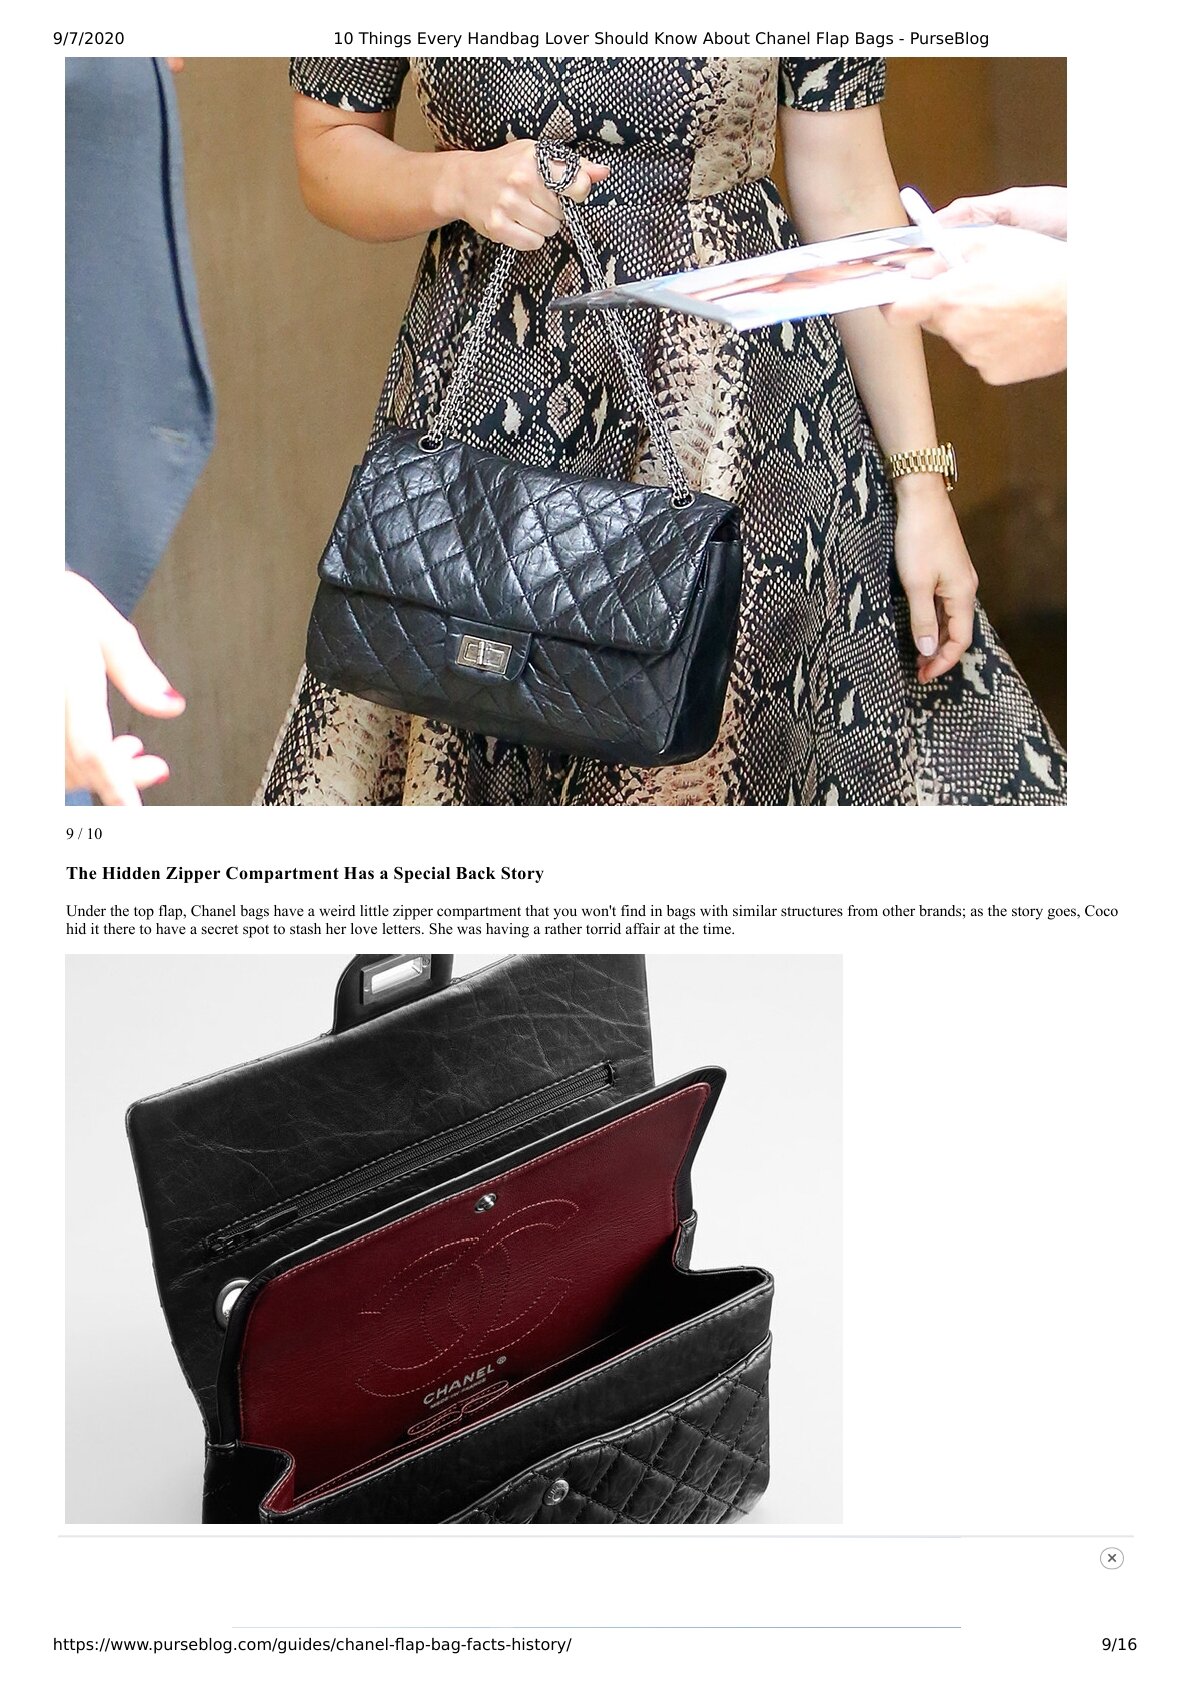 22. 10 Things Every Handbag Lover Should Know About Chanel Flap Bags - My  Dreamz Closet